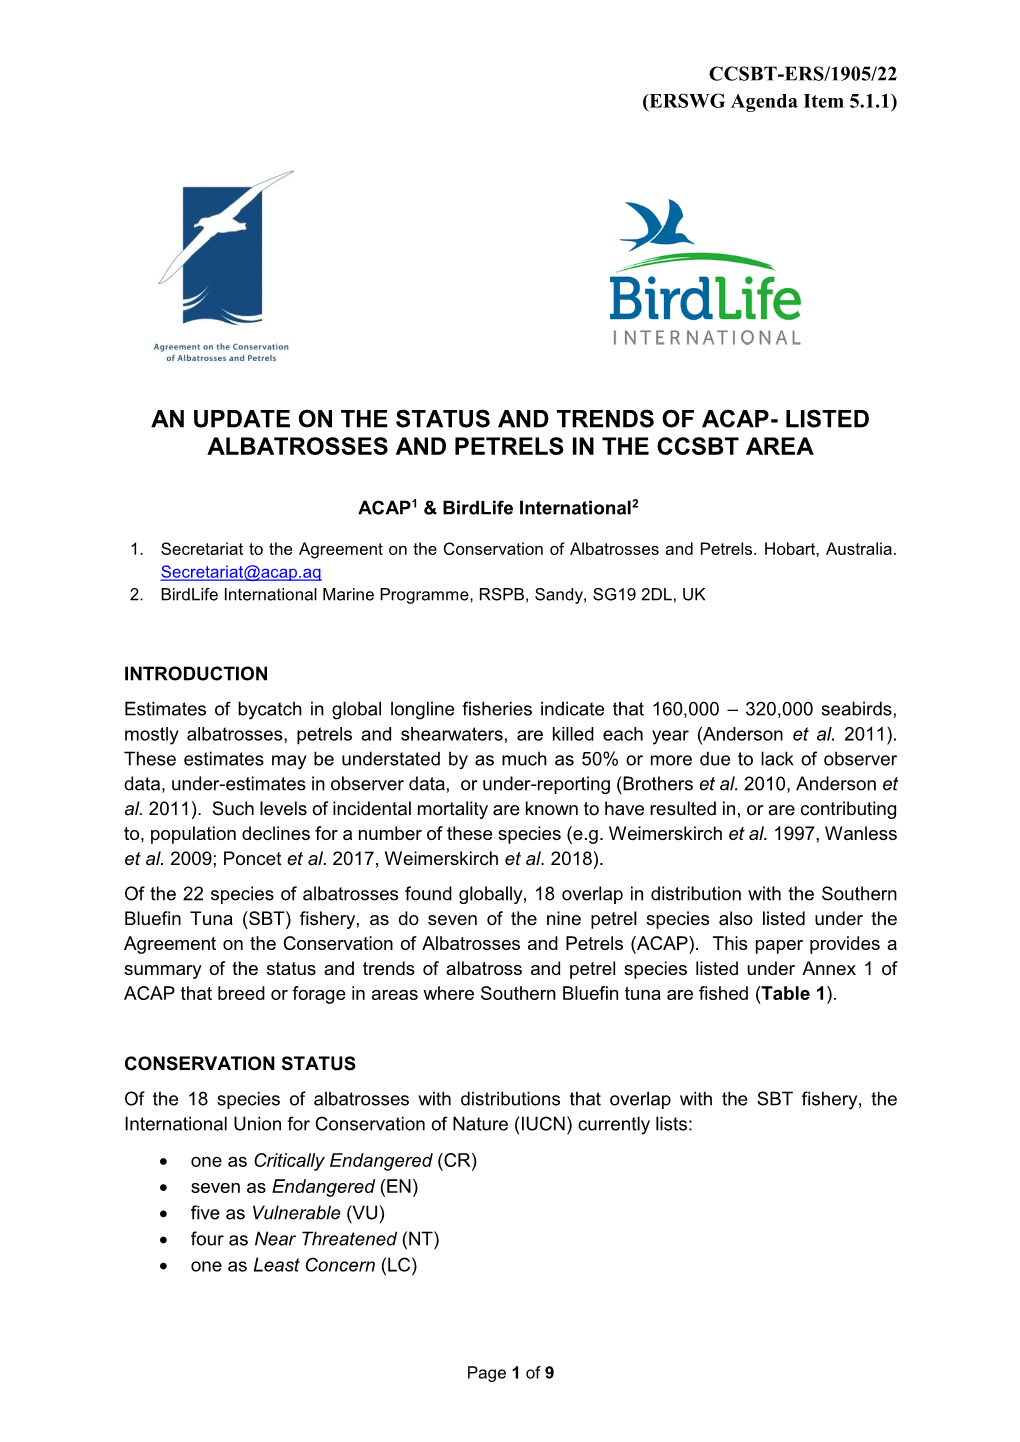 An Update on the Status and Trends of Acap- Listed Albatrosses and Petrels in the Ccsbt Area